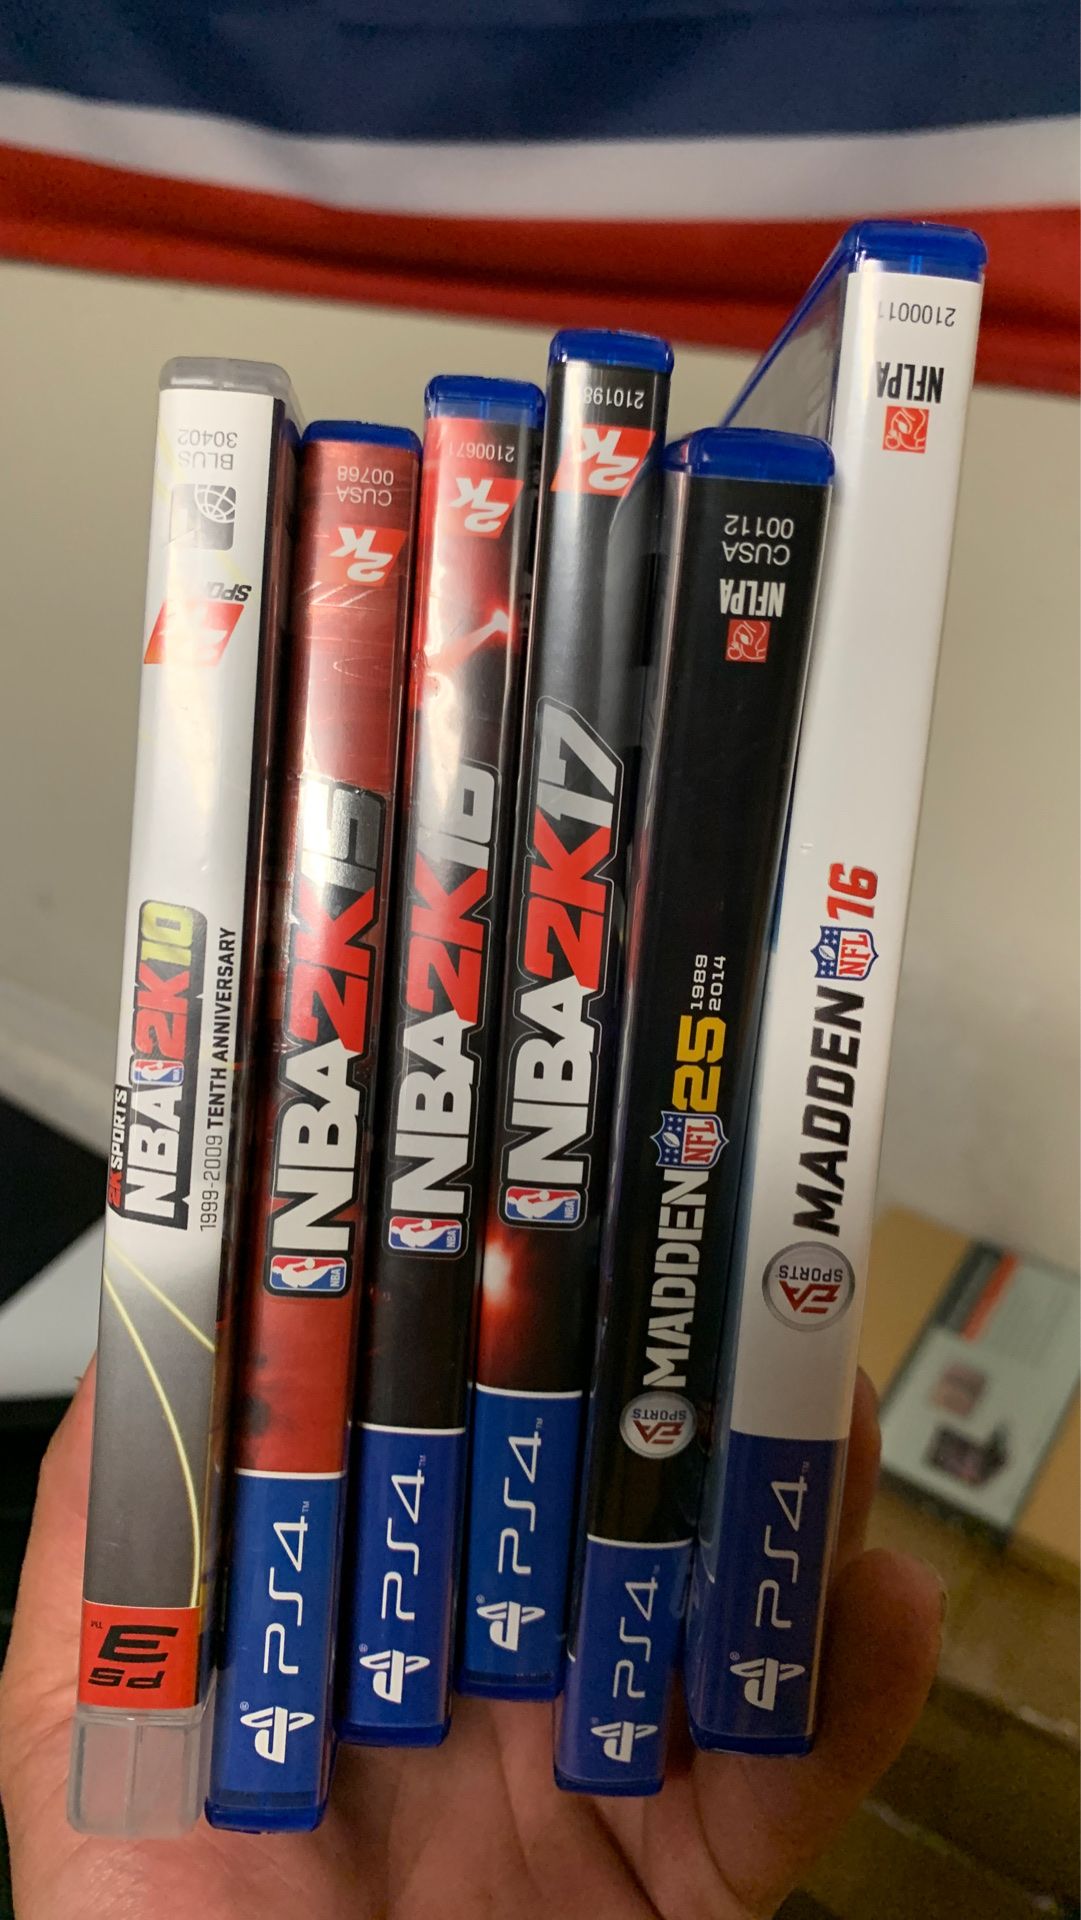 PS4 and ps3 games